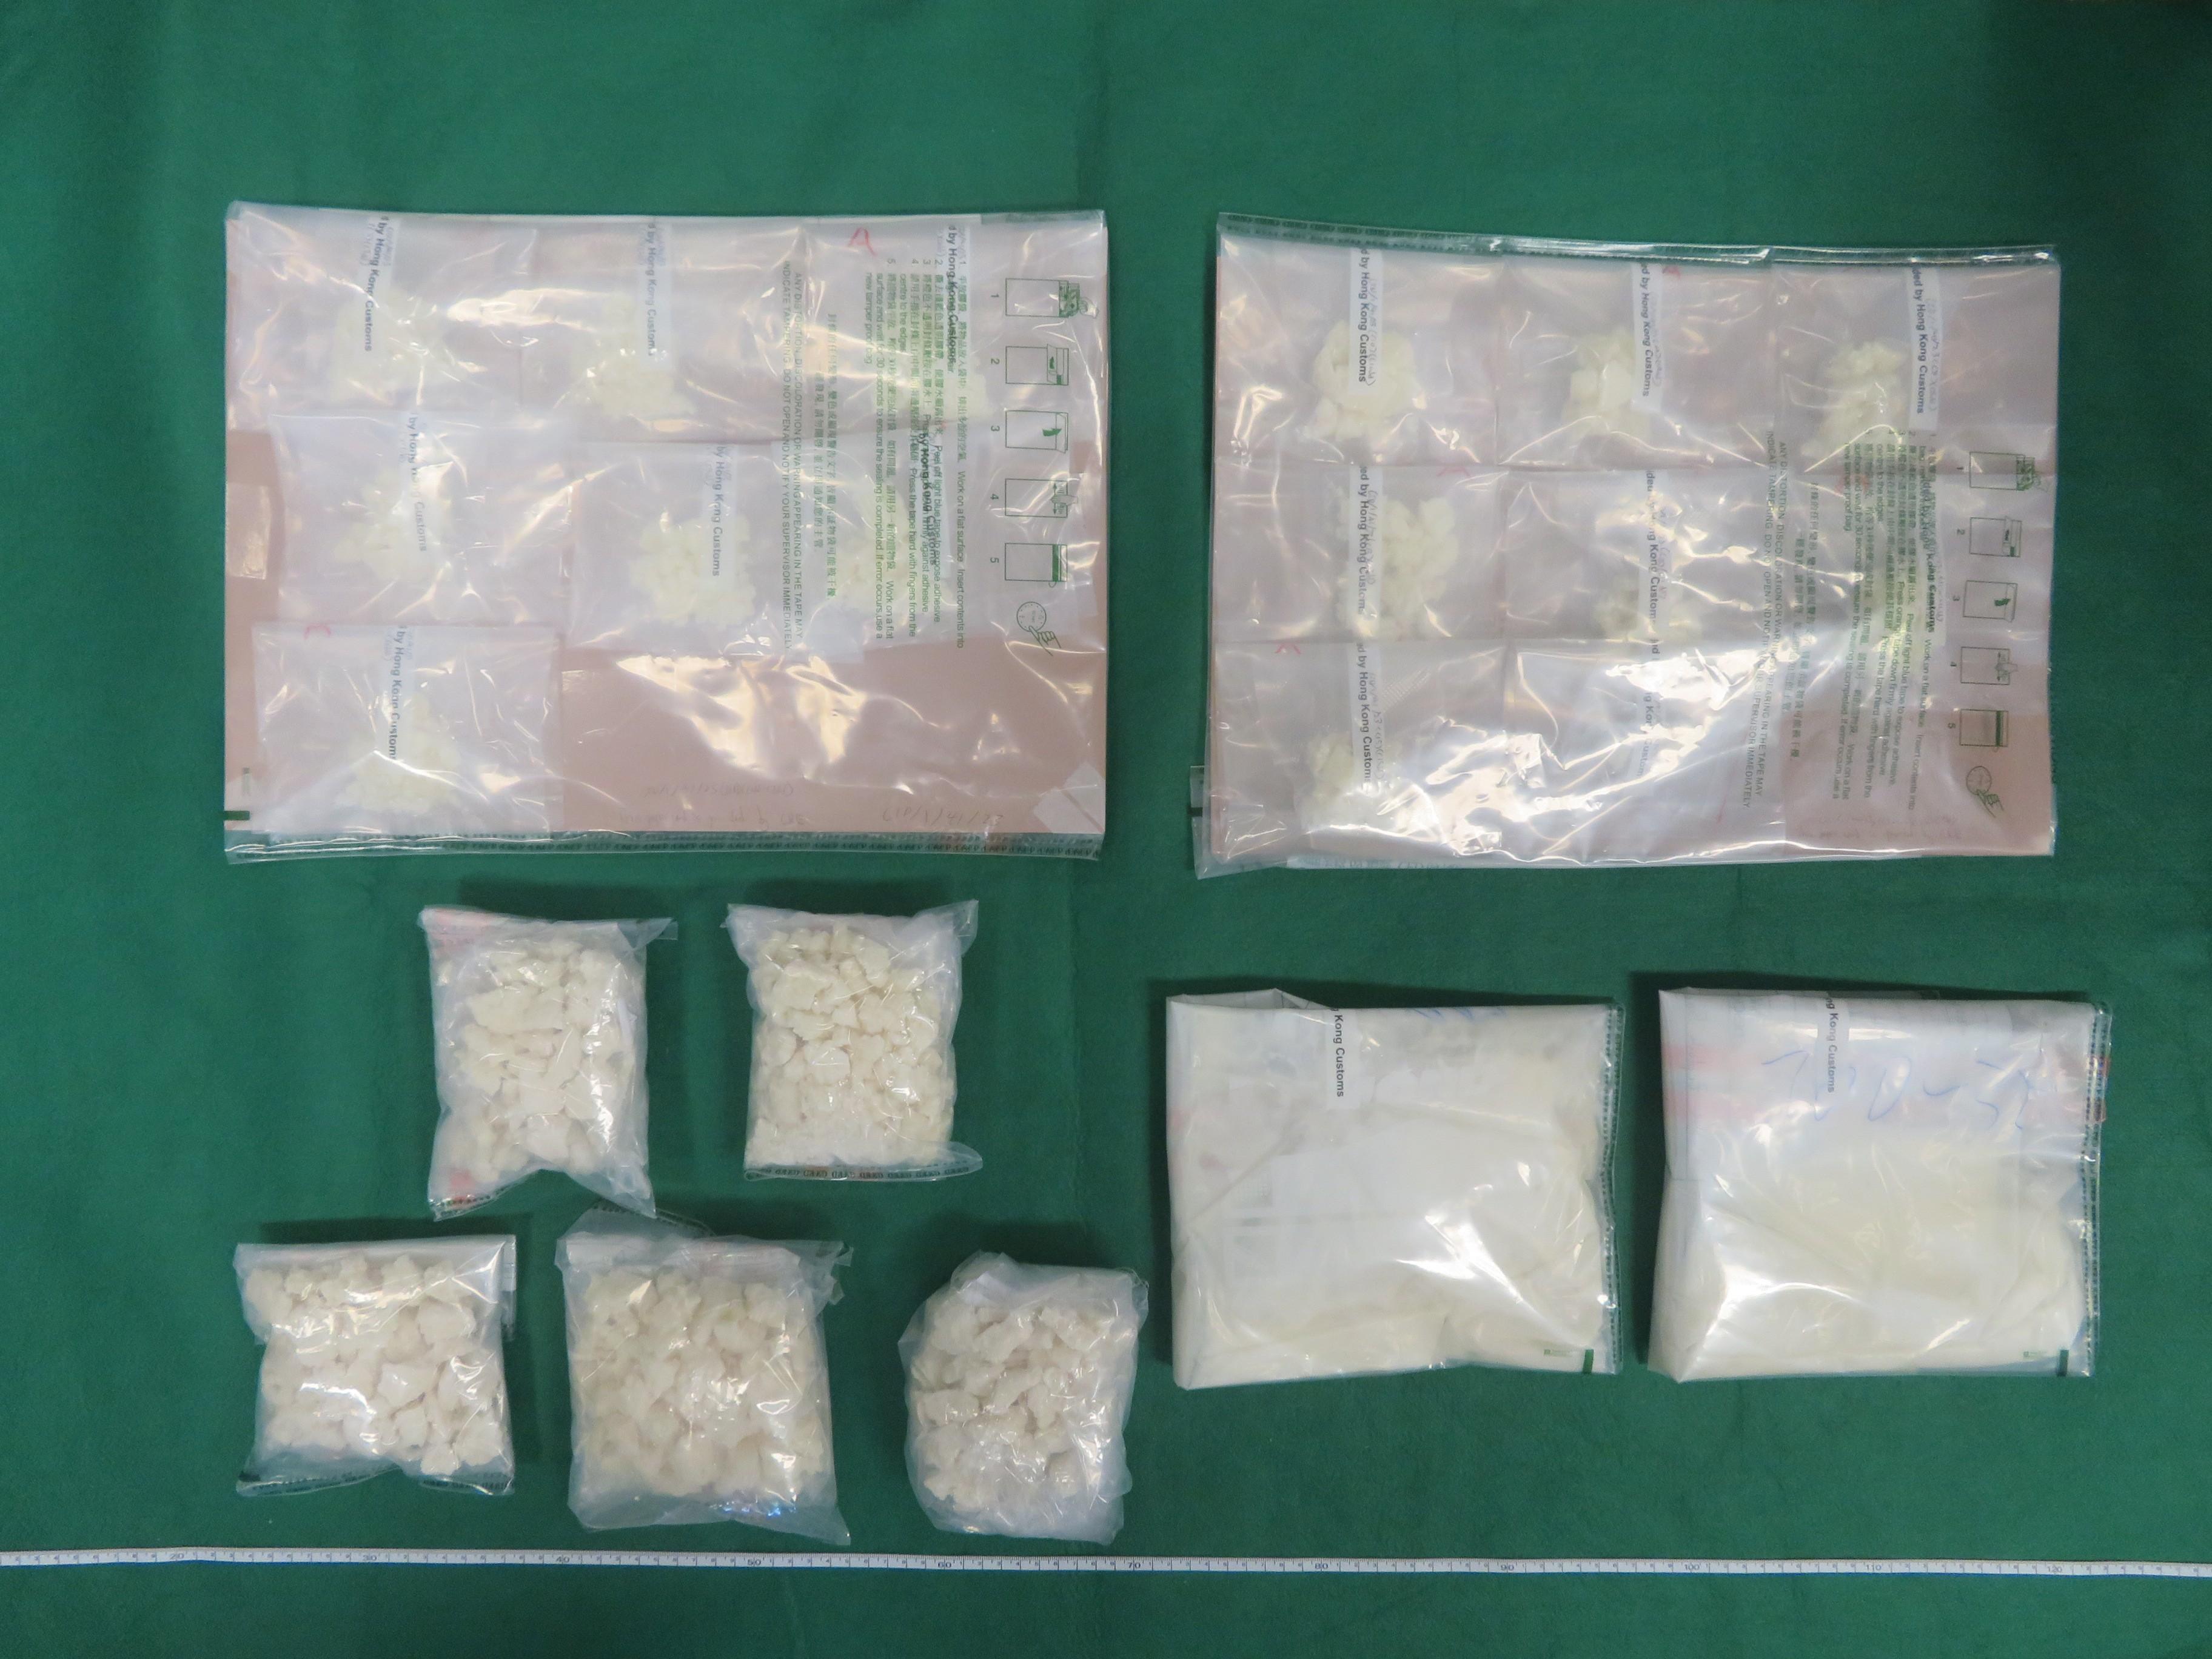 Hong Kong Customs yesterday (September 20) seized about 1.3 kilograms of suspected crack cocaine and about 550 grams of suspected liquid crack cocaine with a total estimated market value of about $2.3 million in Kowloon Tong. Photo shows the suspected crack cocaine and suspected liquid crack cocaine seized.